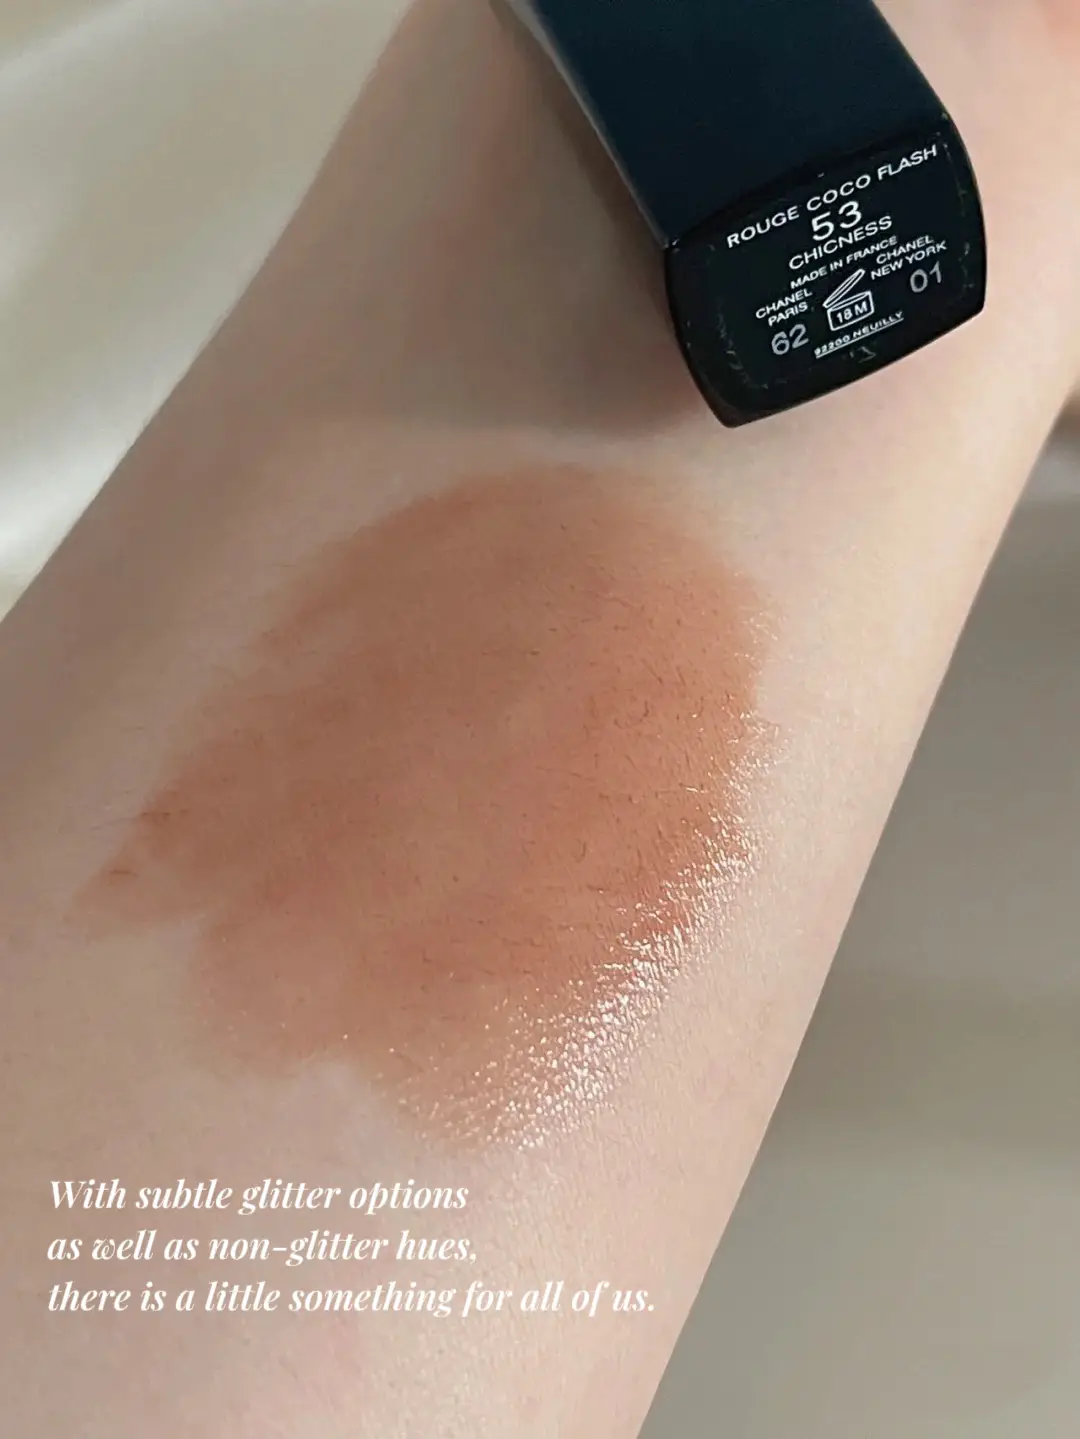 In depth review of Chanel Rouge Coco Flash, Gallery posted by france